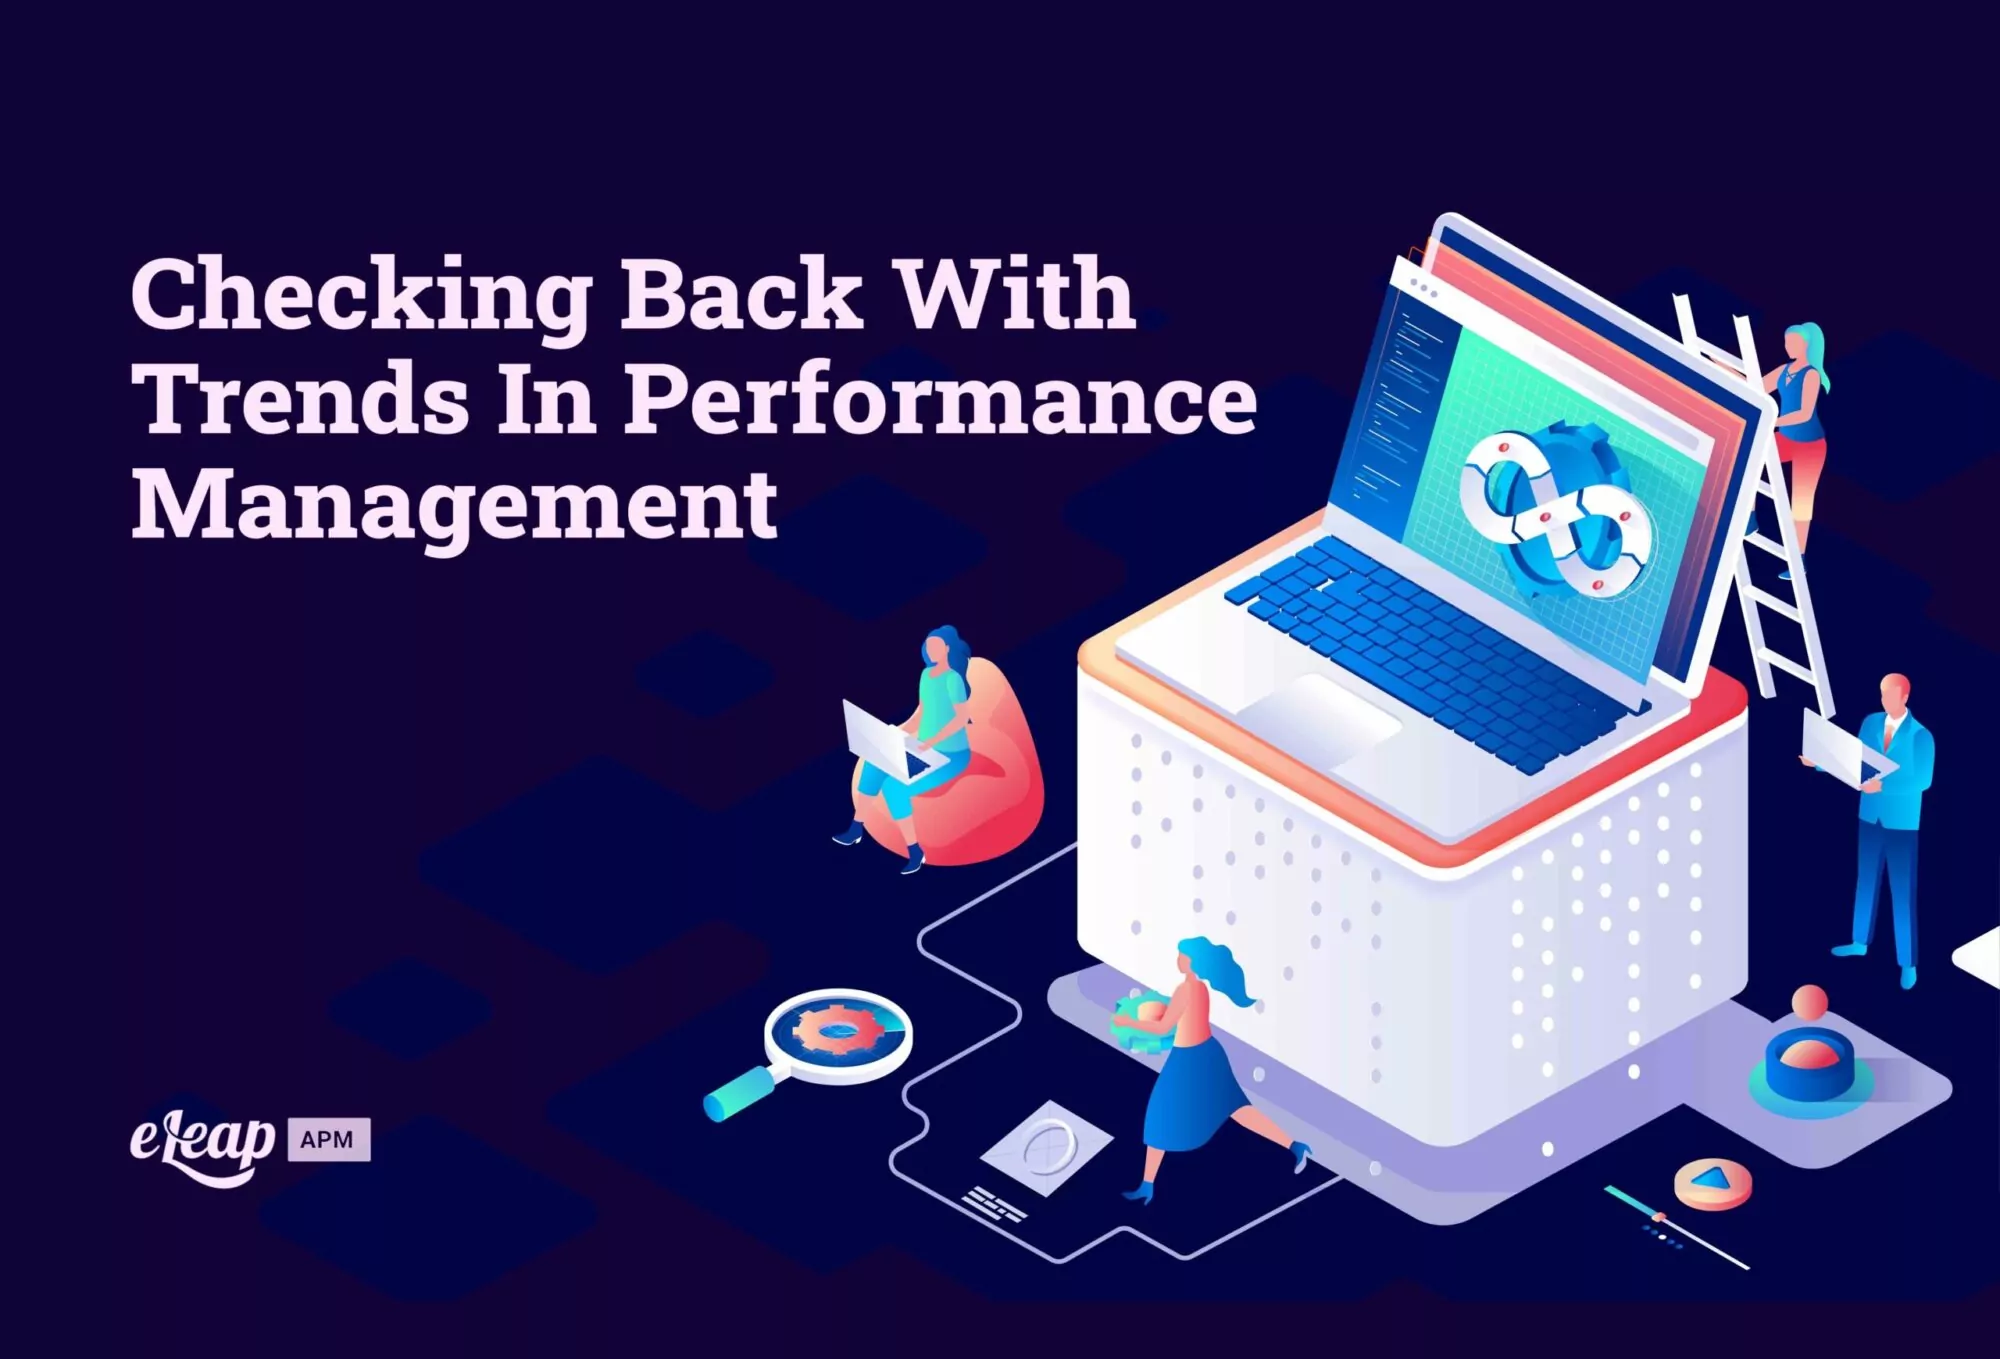 Checking Back With Trends In Performance Management